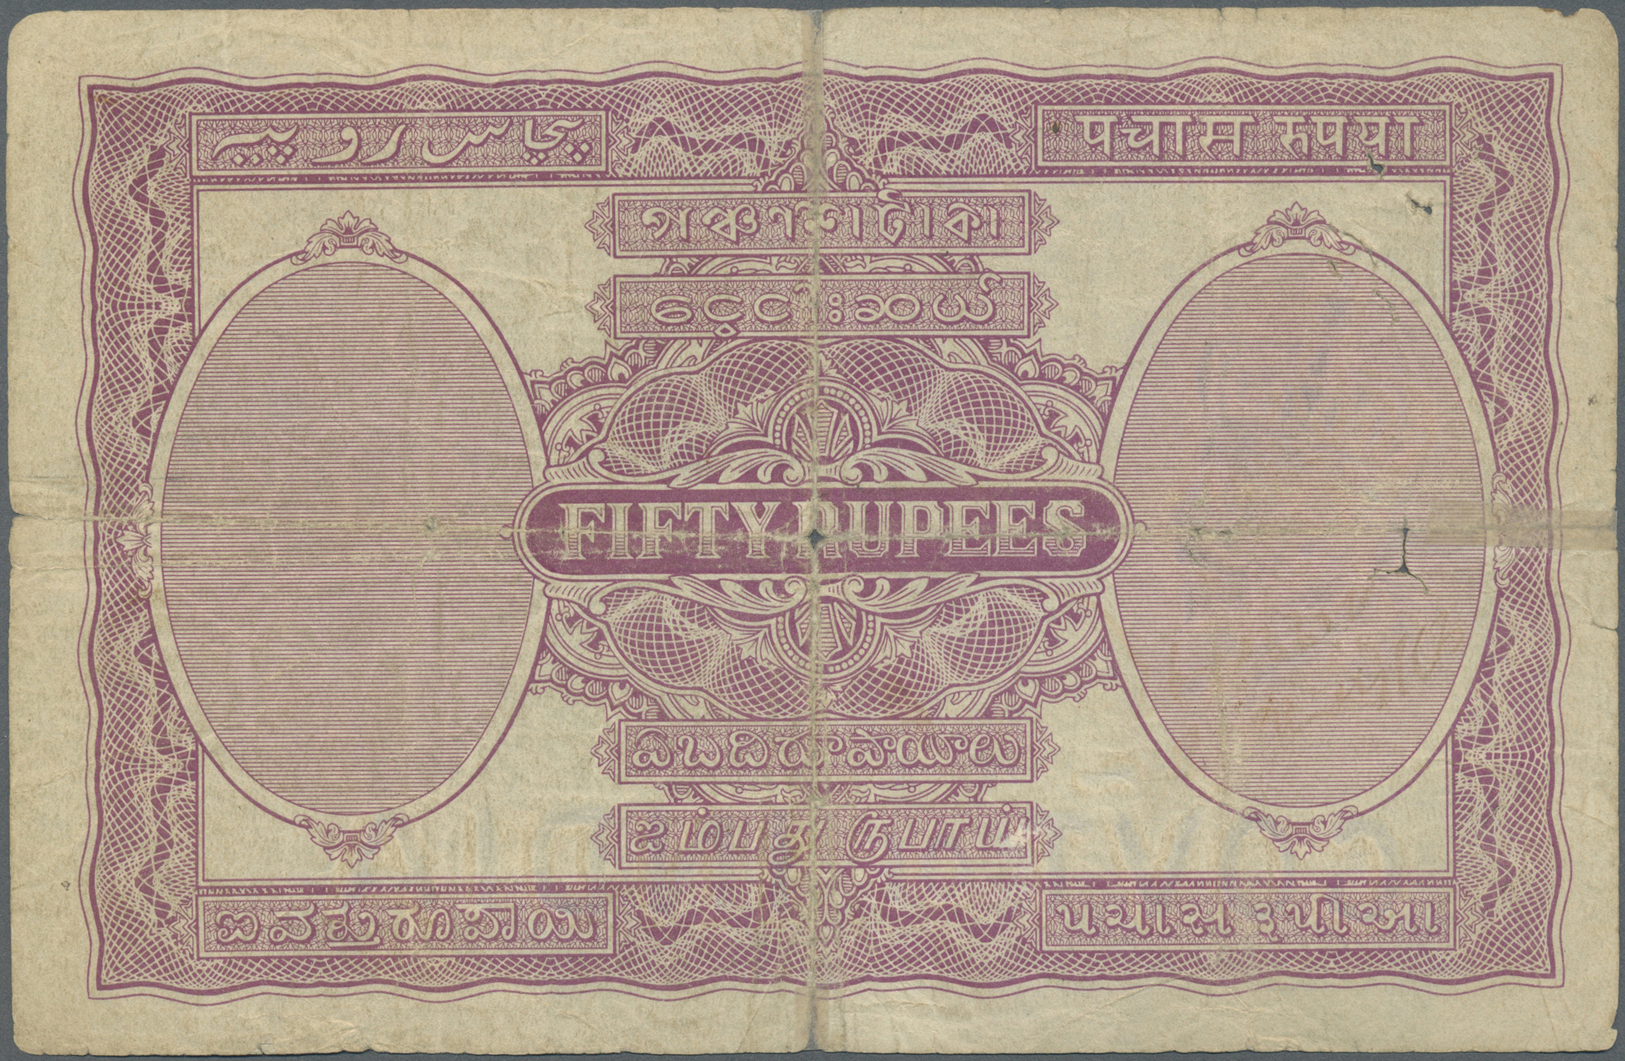 01074 India / Indien: 50 Rupees ND(1930) P. 9b, Sign Taylor, Issue For BOMBAY, Strong Horizontal And Center Fold, Center - India